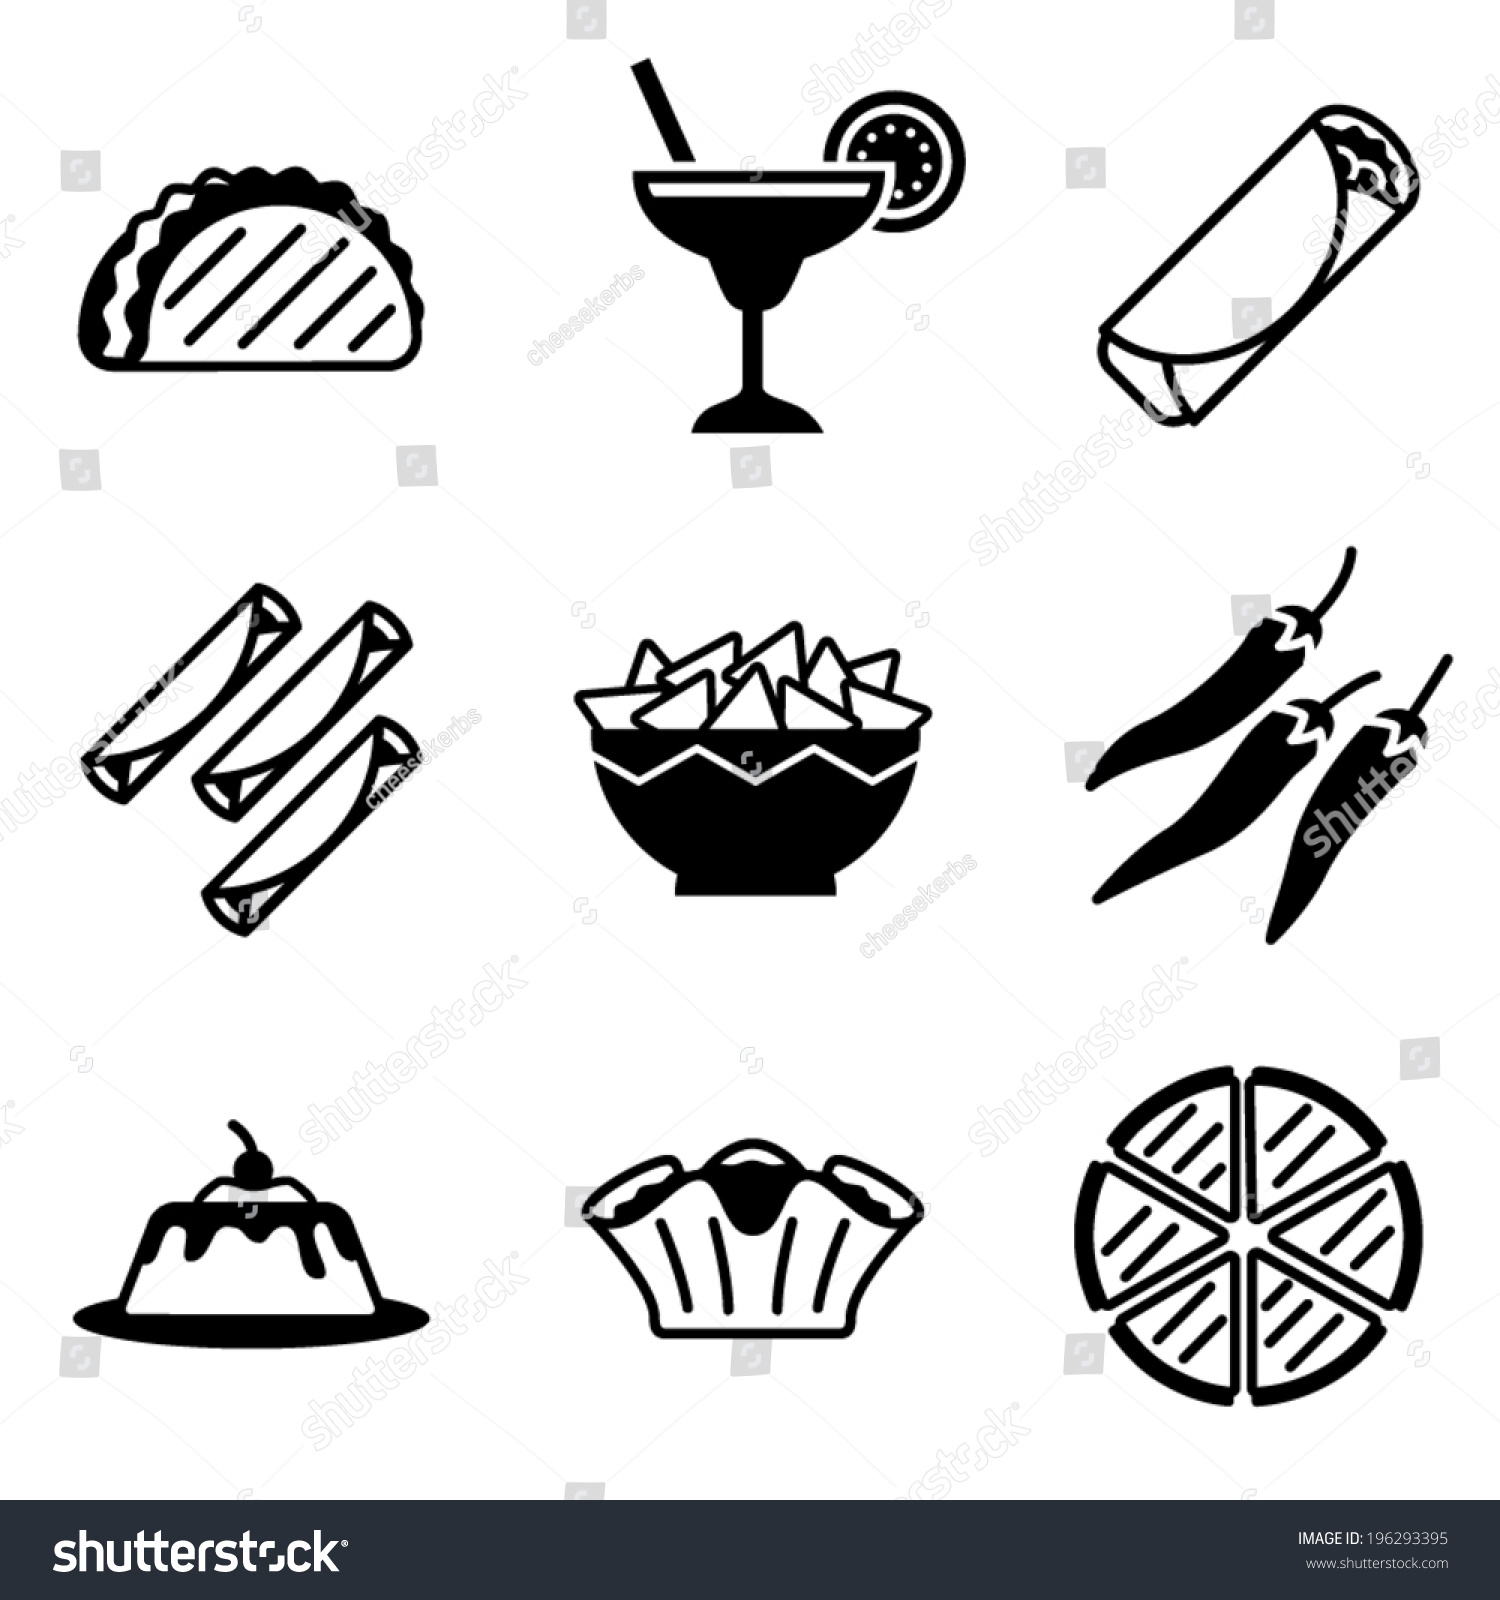 SVG of vector mexican food icons svg